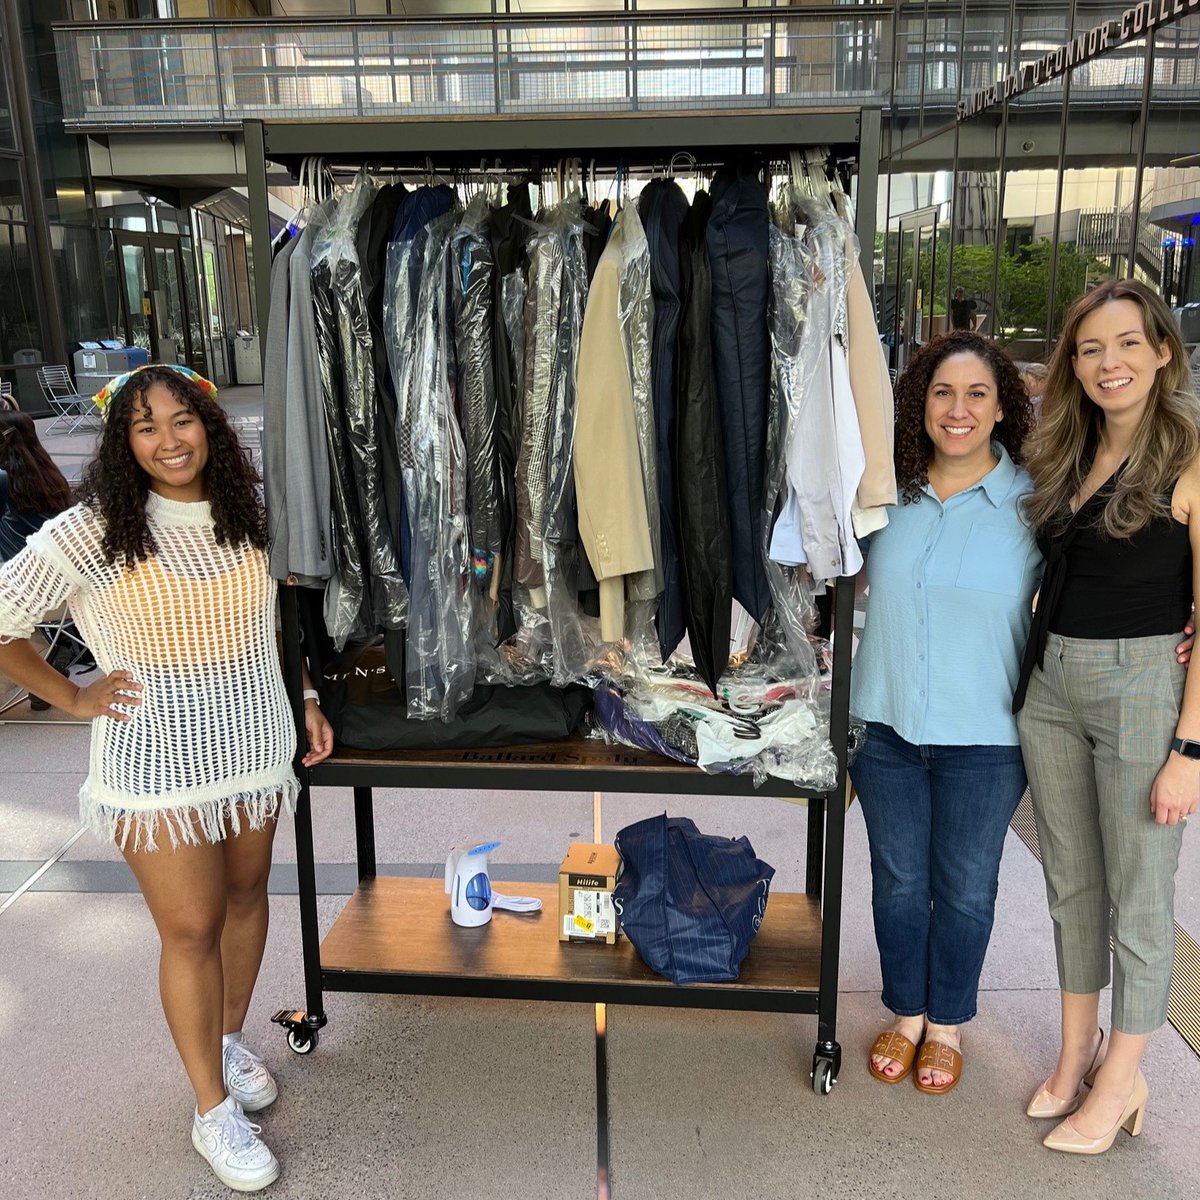 We were thrilled to host a professional #clothingdrive for the ASU Black Law Student Association in our #Phoenix office. It was a fantastic opportunity for us to support a great cause!